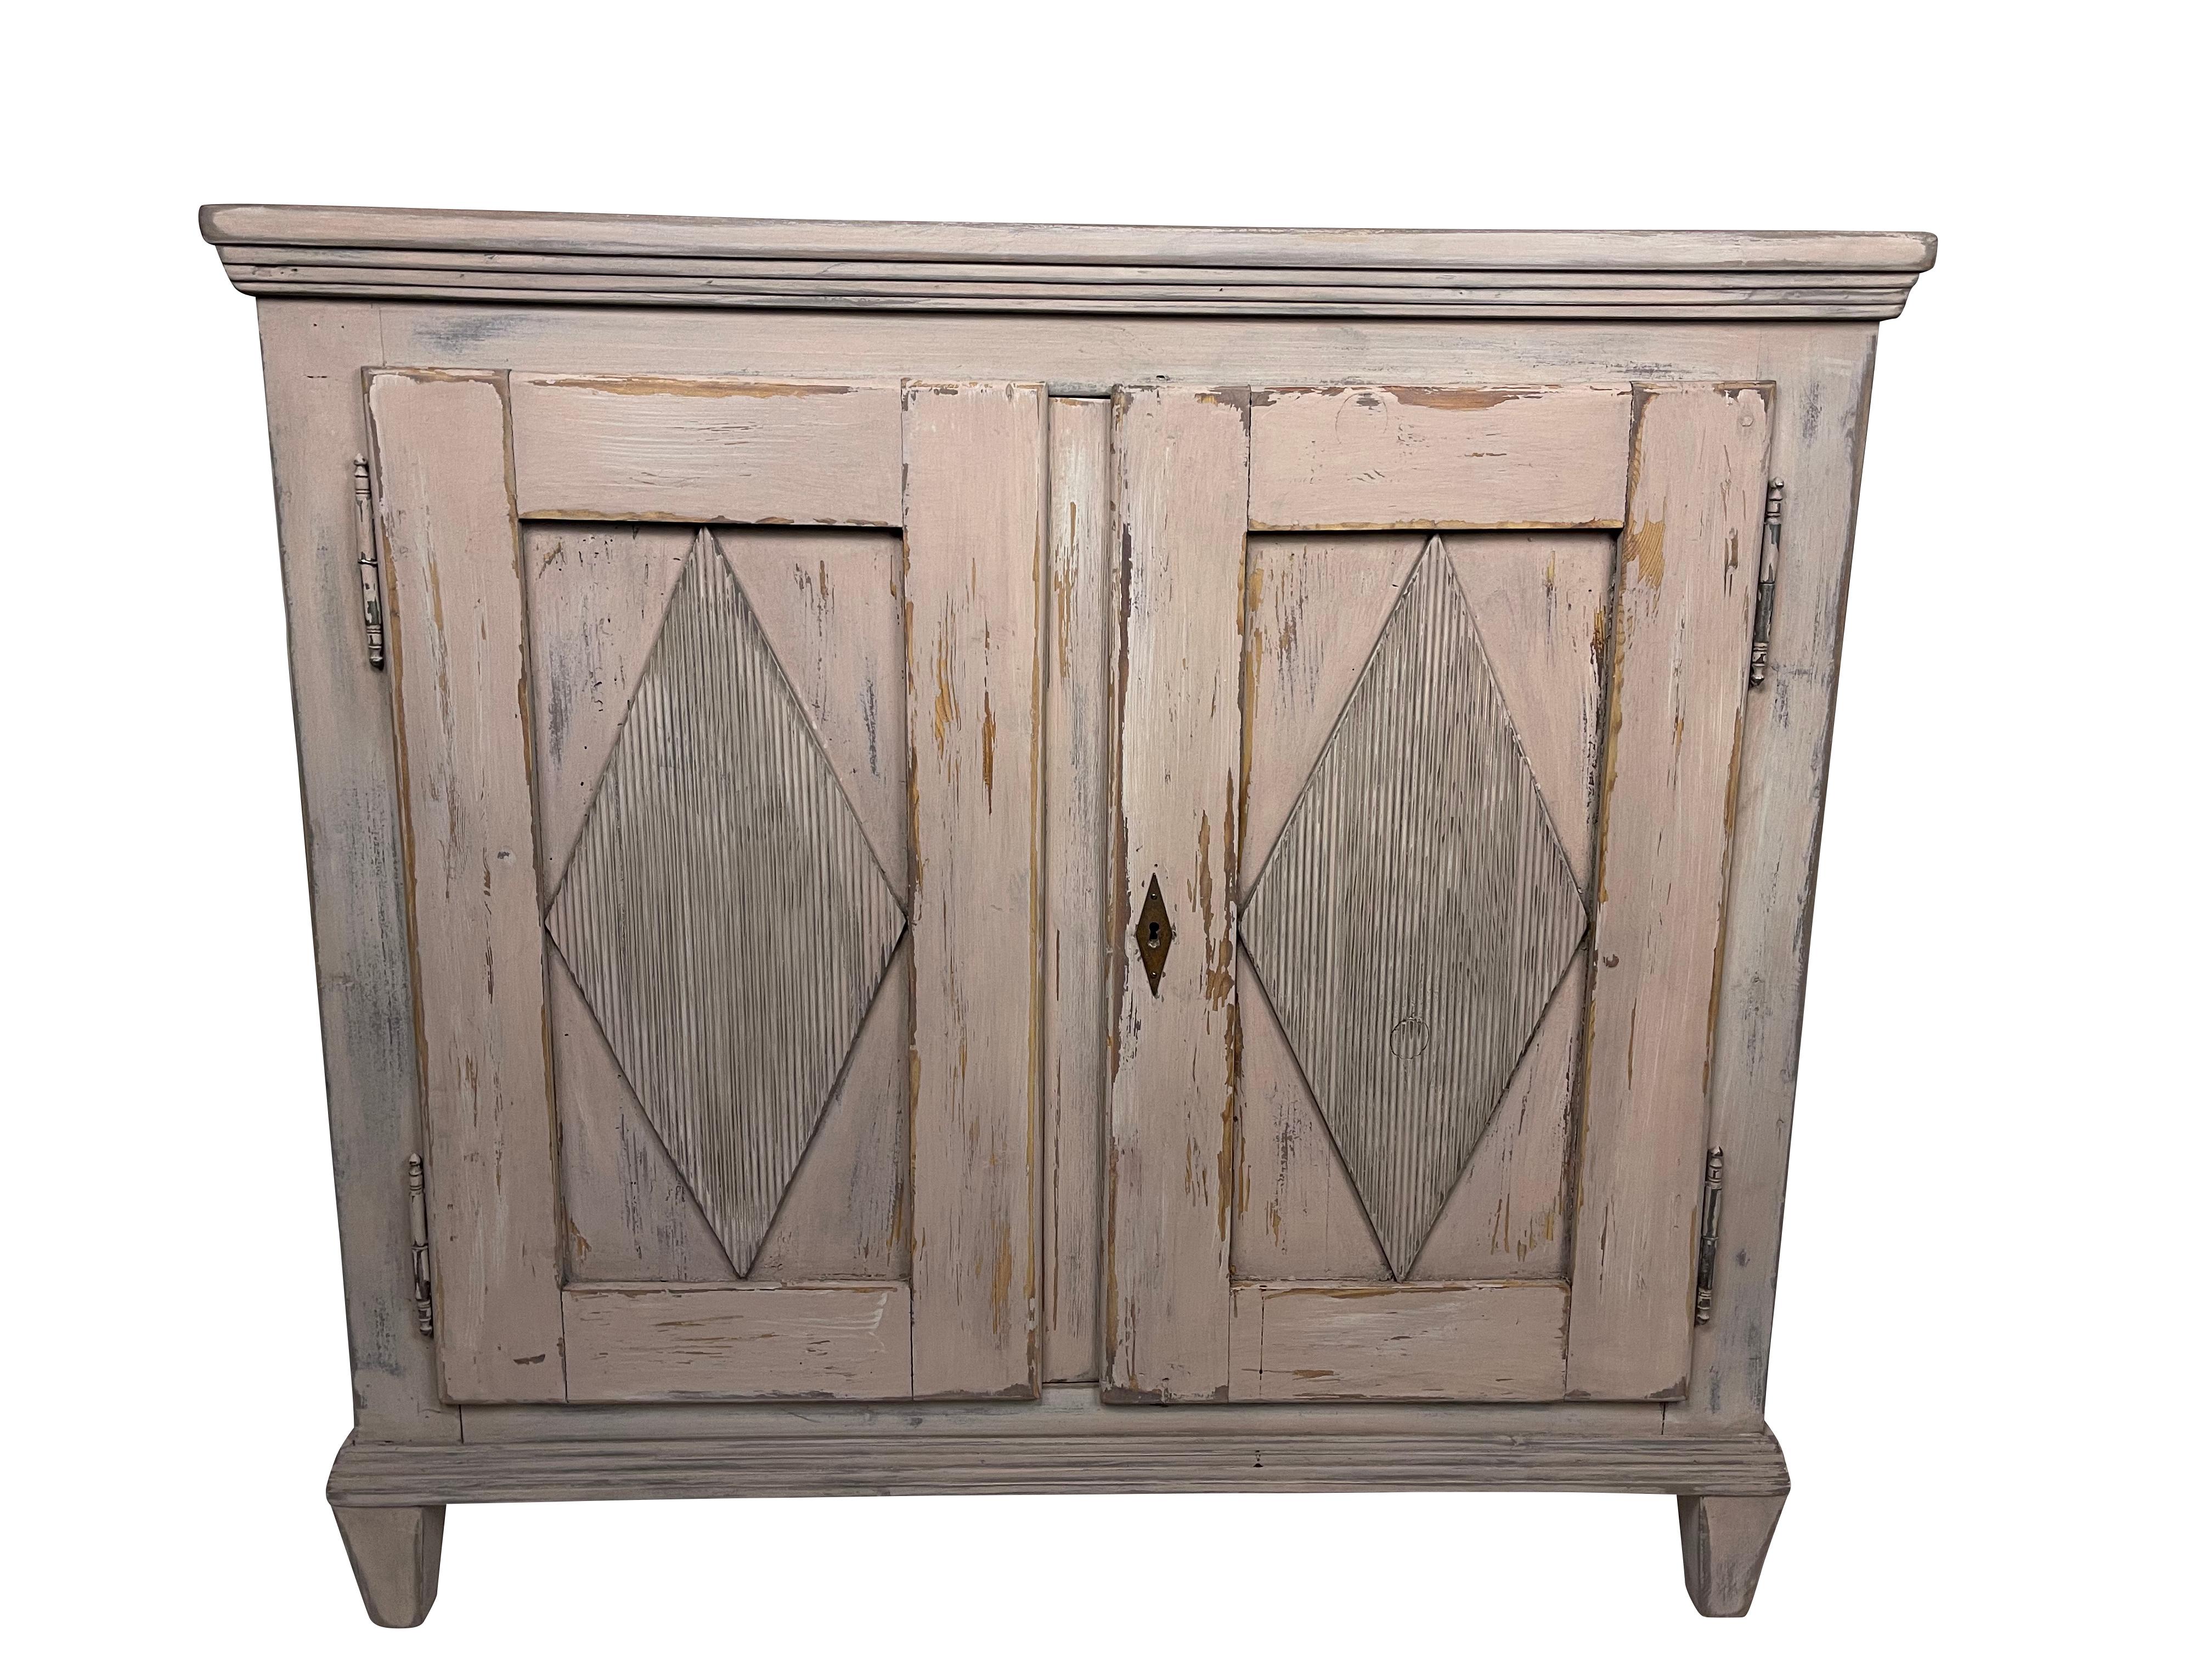 18th century Swedish ‘Gustavian’ period painted buffet cupboard with two doors, pine cupboard with original paint Sweden, circa 1800. Doors are decorated with diamond-reeded motifs. Beautiful in an entry, dining room, kitchen. Original key